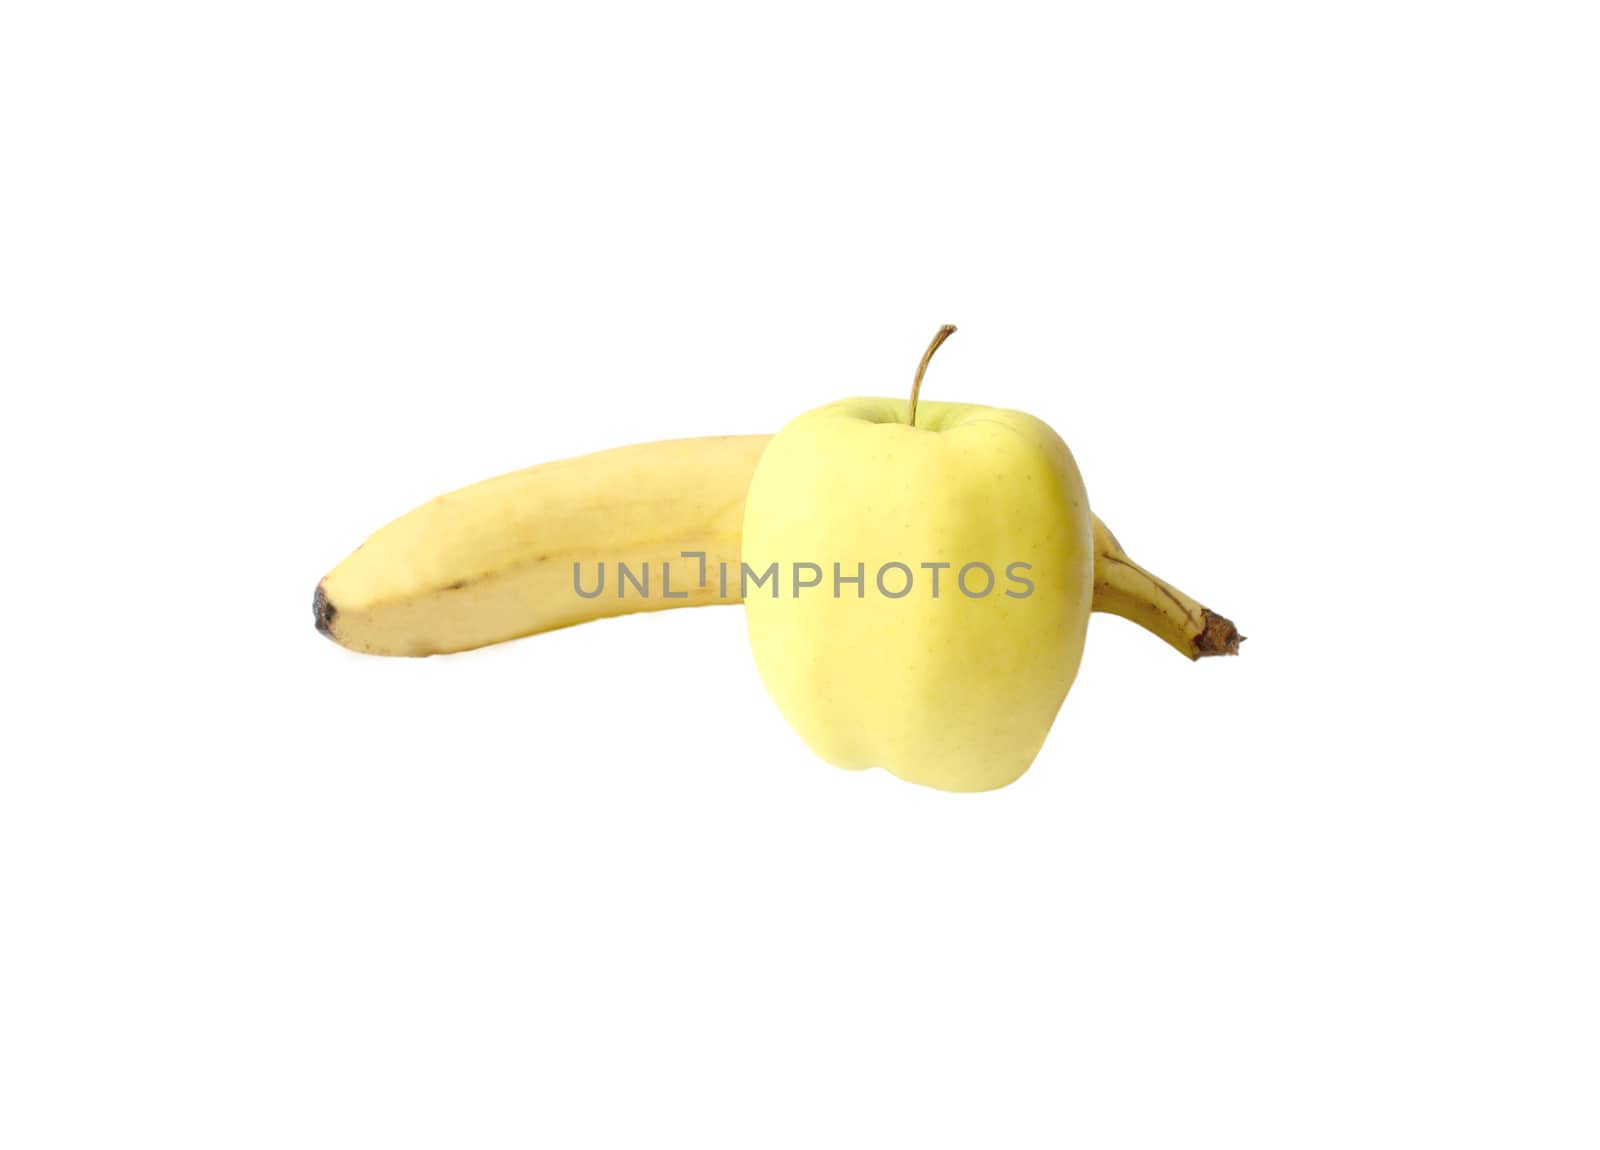 An Apple and a banana on a white background